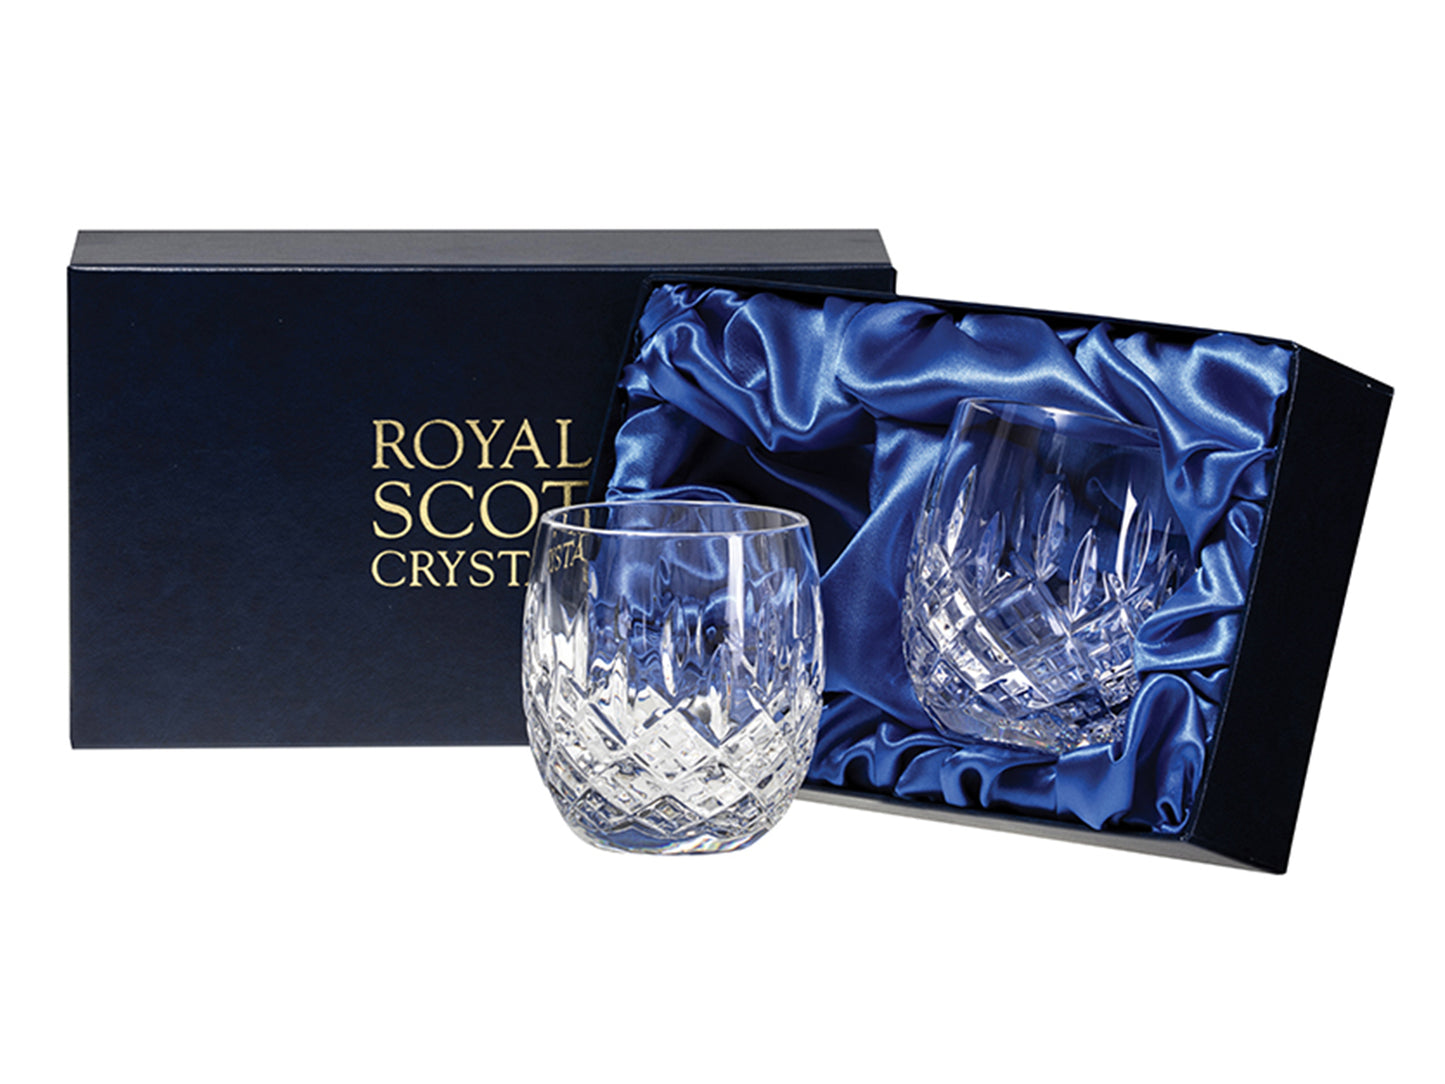 A pair of crystal tumblers with rounded bottoms, featuring a hand-cut design that contains a bed of diamonds and delicate dashes reaching up towards the smooth rim, packaged in a navy blue presentation box with satin lining.